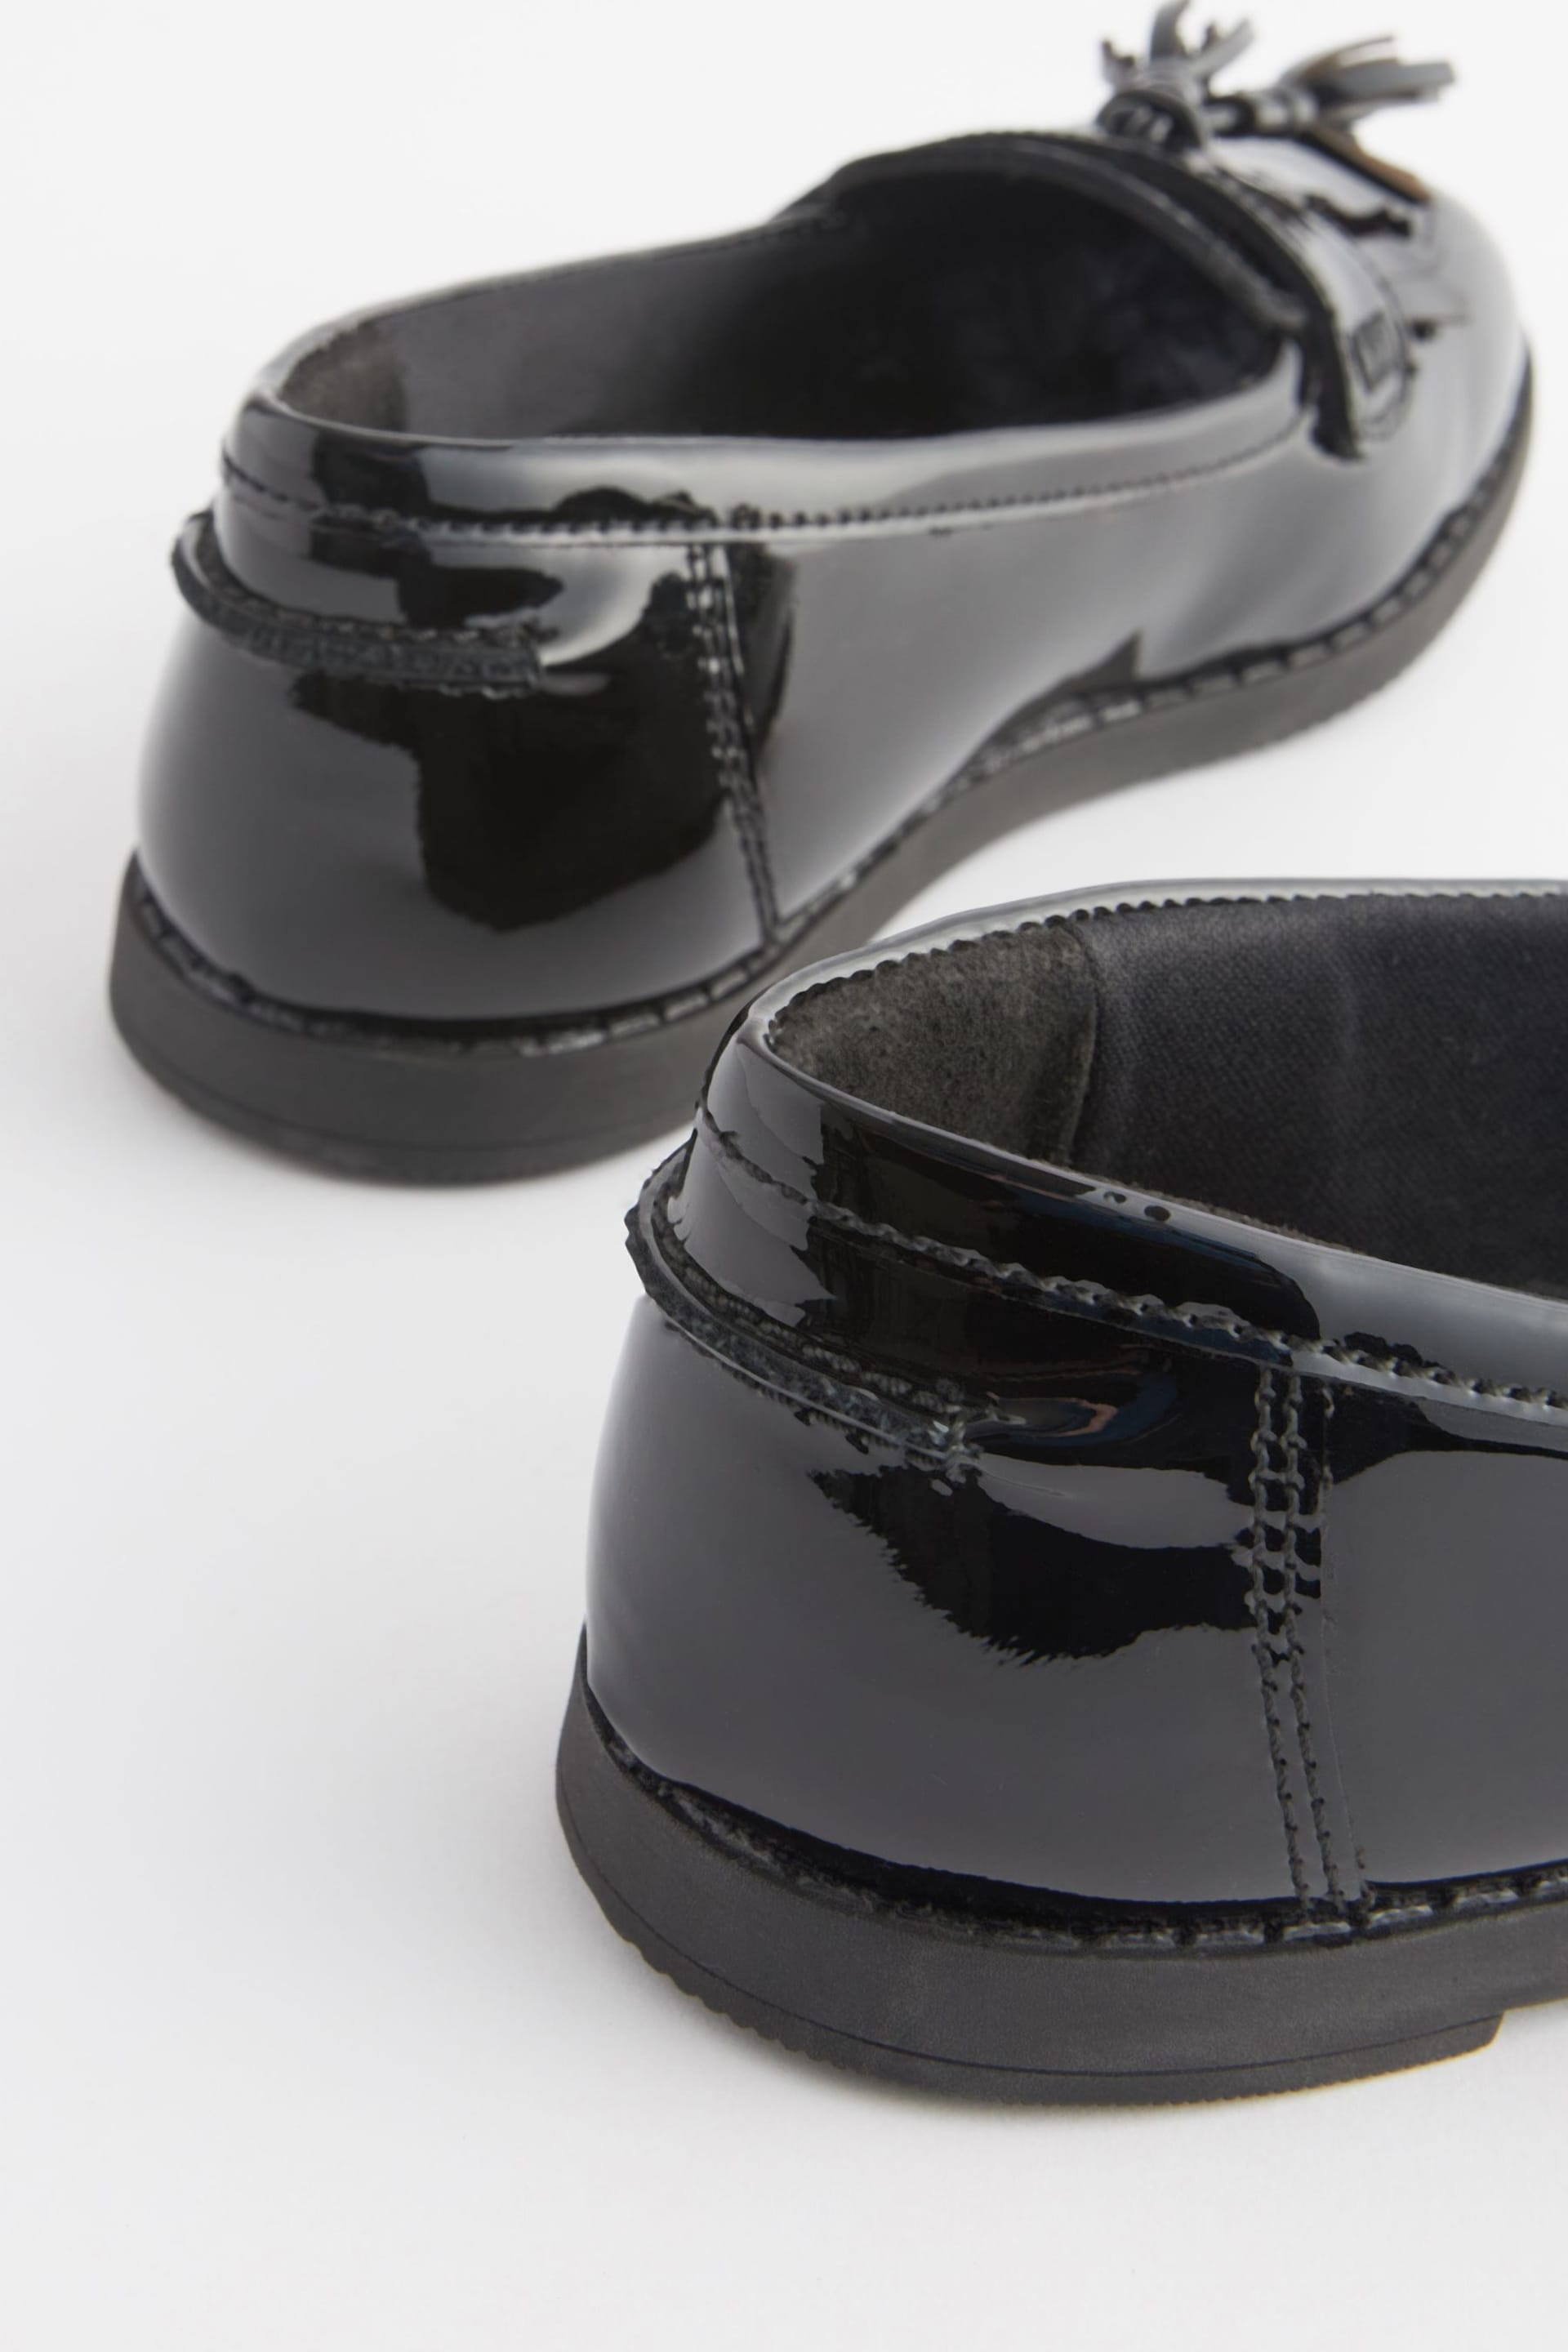 Black Patent Narrow Fit (E) School Leather Tassel Loafers - Image 5 of 5